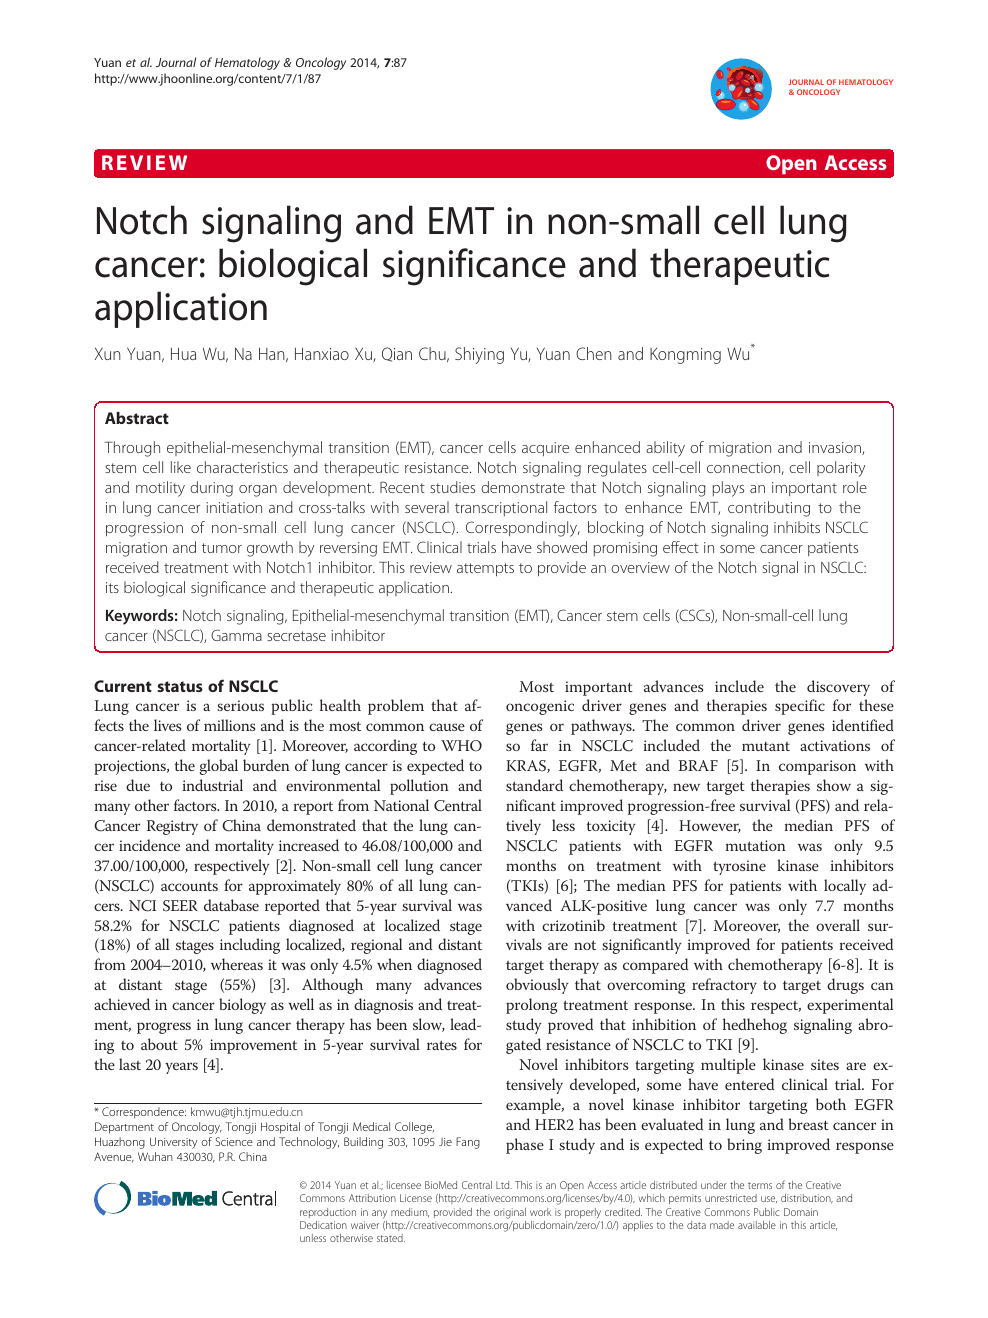 Notch Signaling And Emt In Non Small Cell Lung Cancer Biological Significance And Therapeutic Application Topic Of Research Paper In Biological Sciences Download Scholarly Article Pdf And Read For Free On Cyberleninka